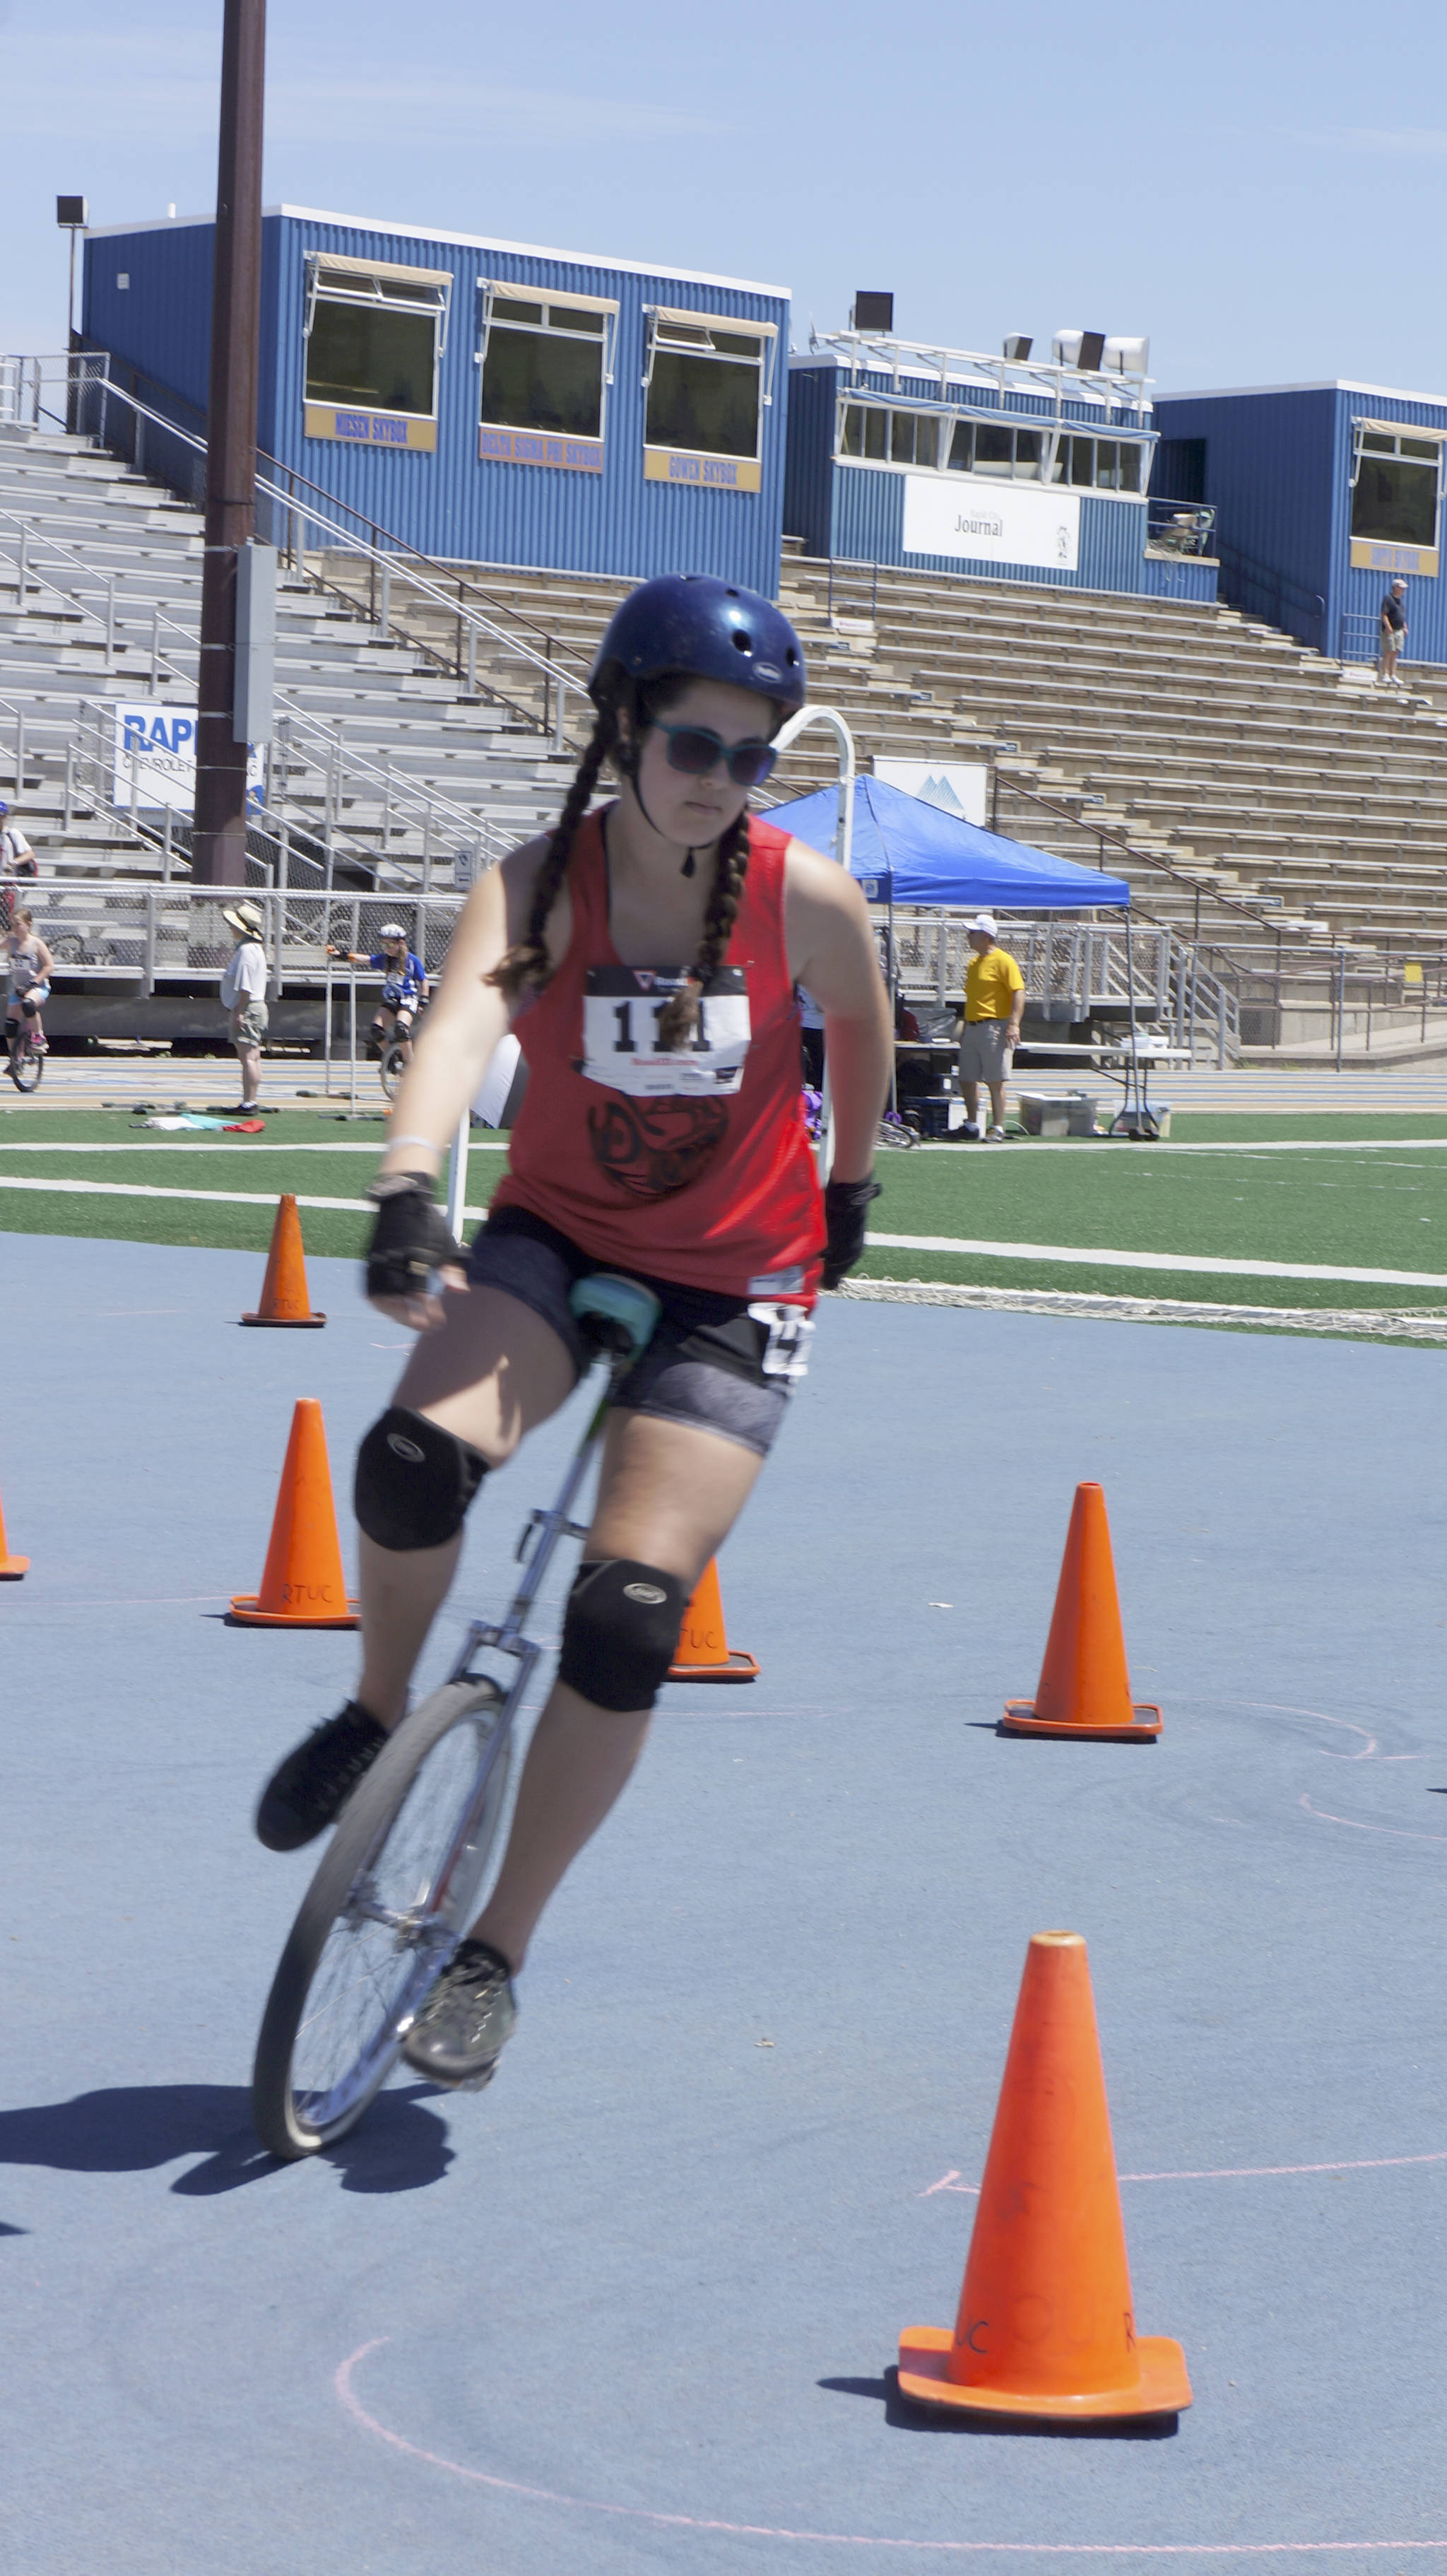 A Snoqualmie Valley unicyclist takes on the obstacle course at NAUCC 2016 in South Dakota. (Courtesy Photo)